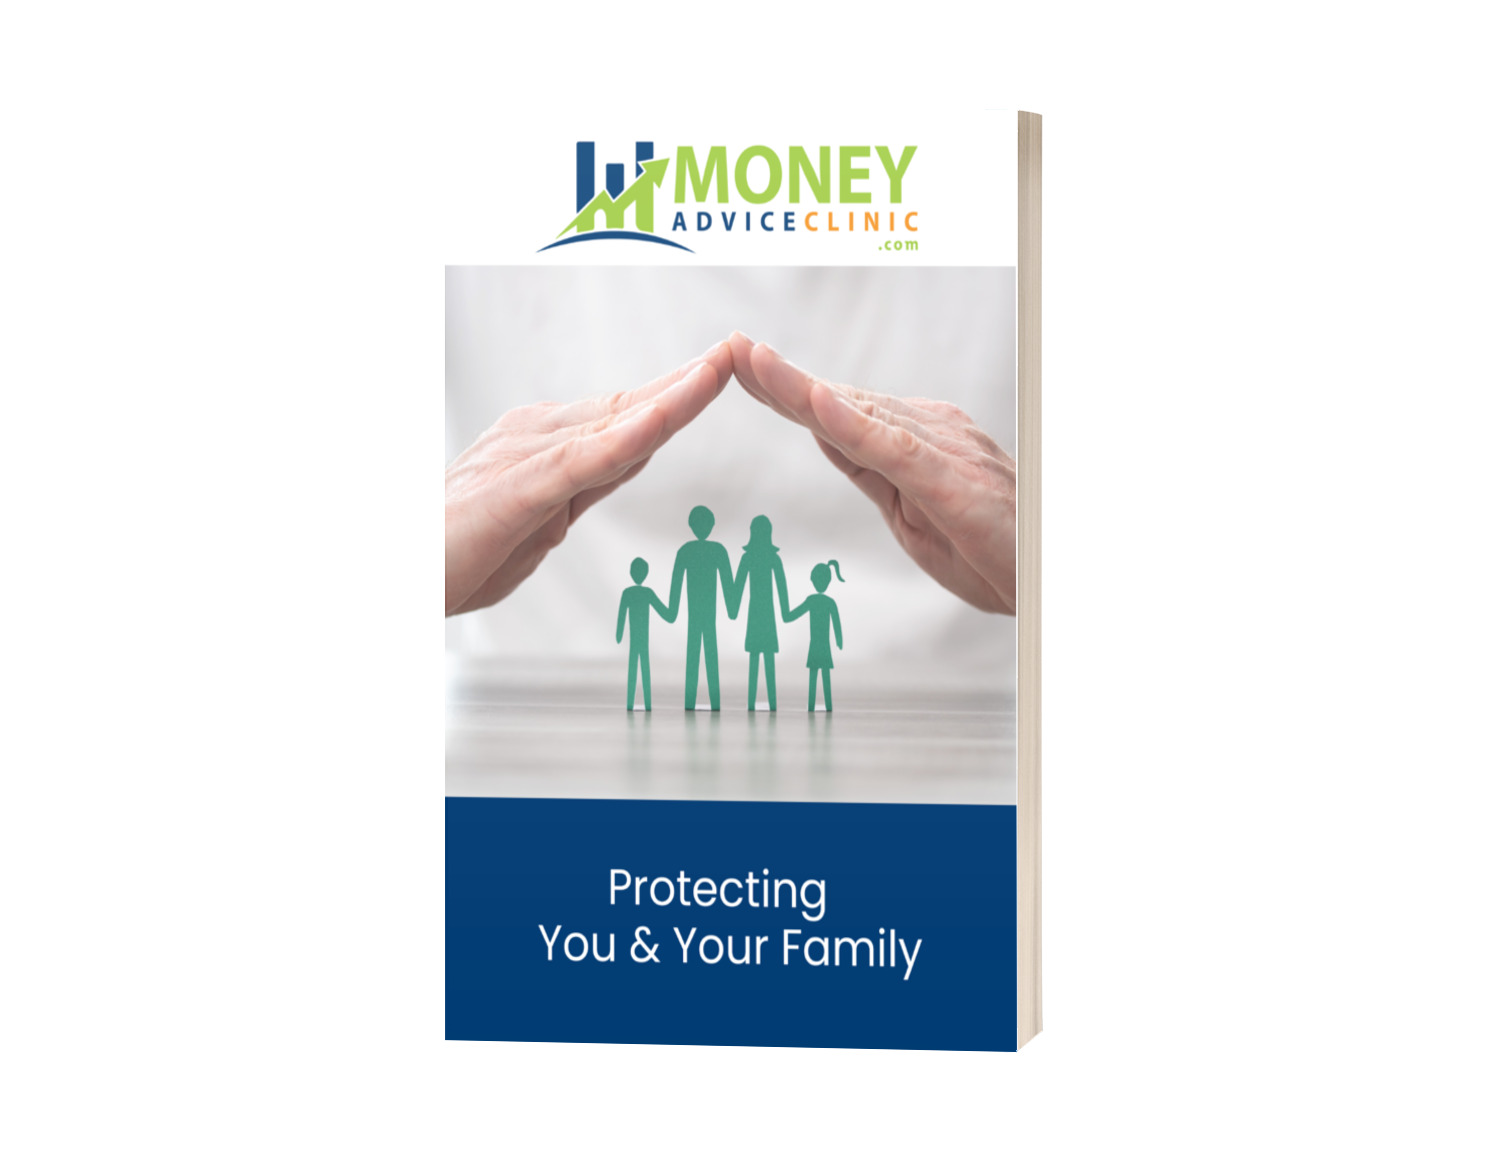 Protecting Your & Your Family Guide